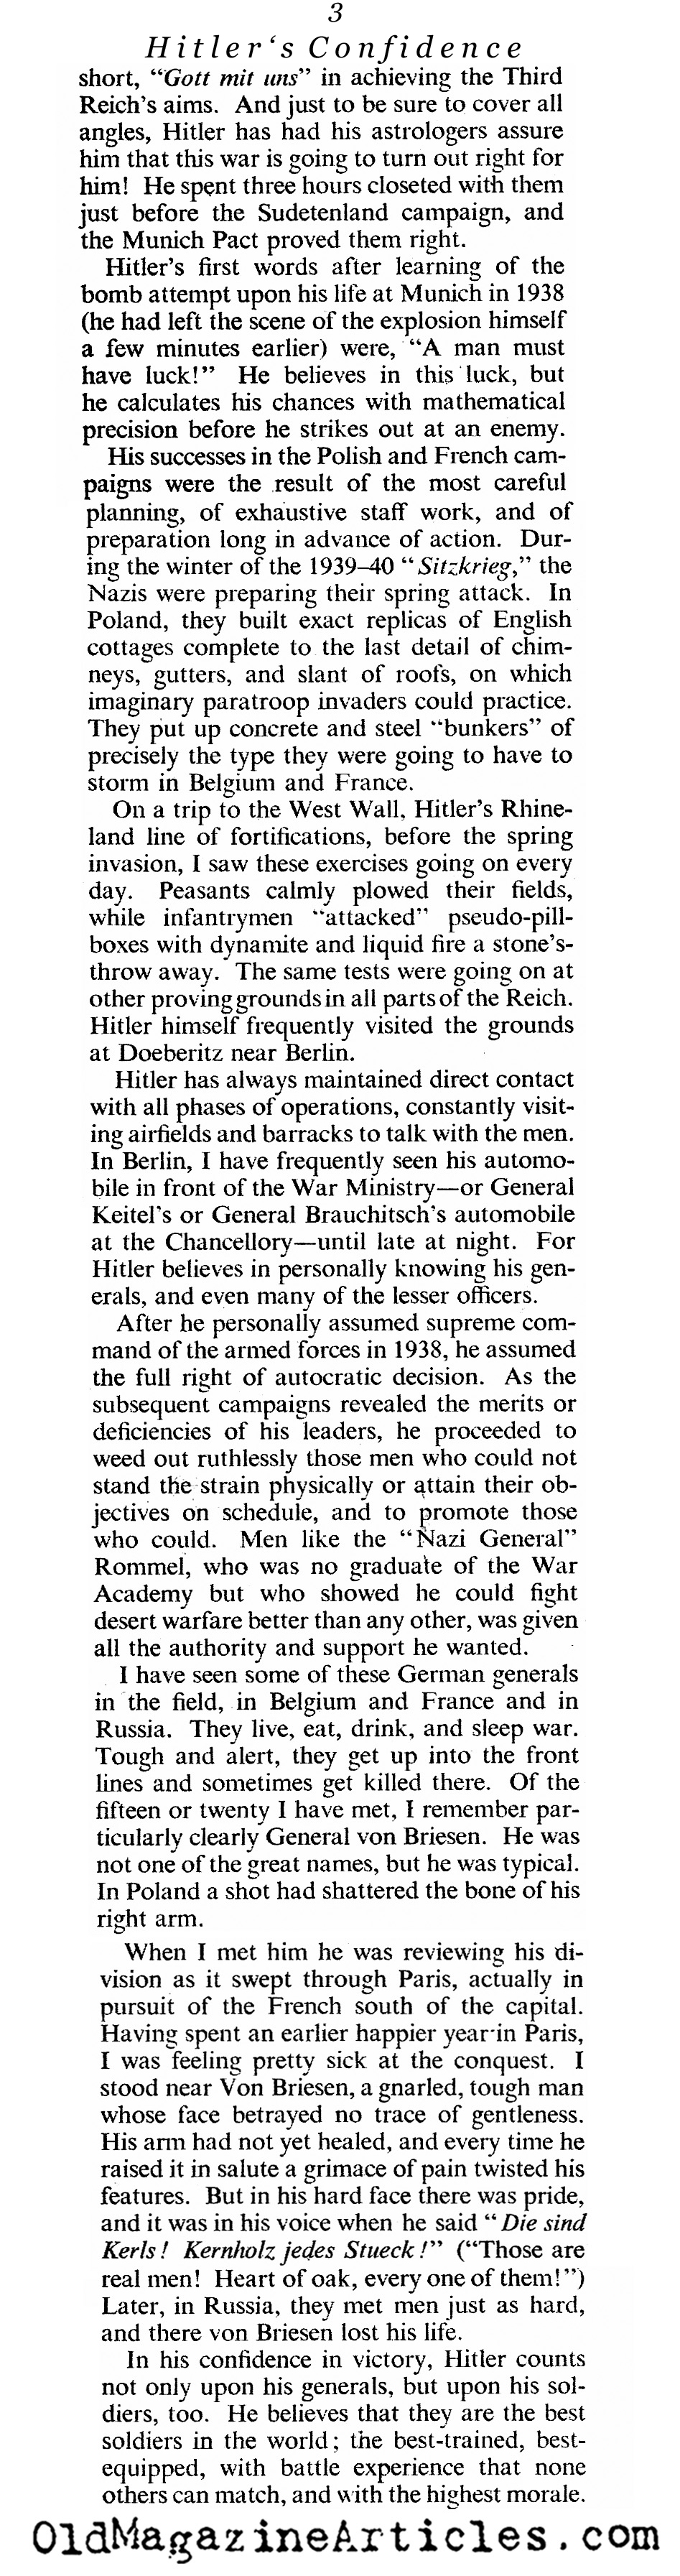 ''Why Hitler Thinks He'll Win'' (The American Magazine, 1942)